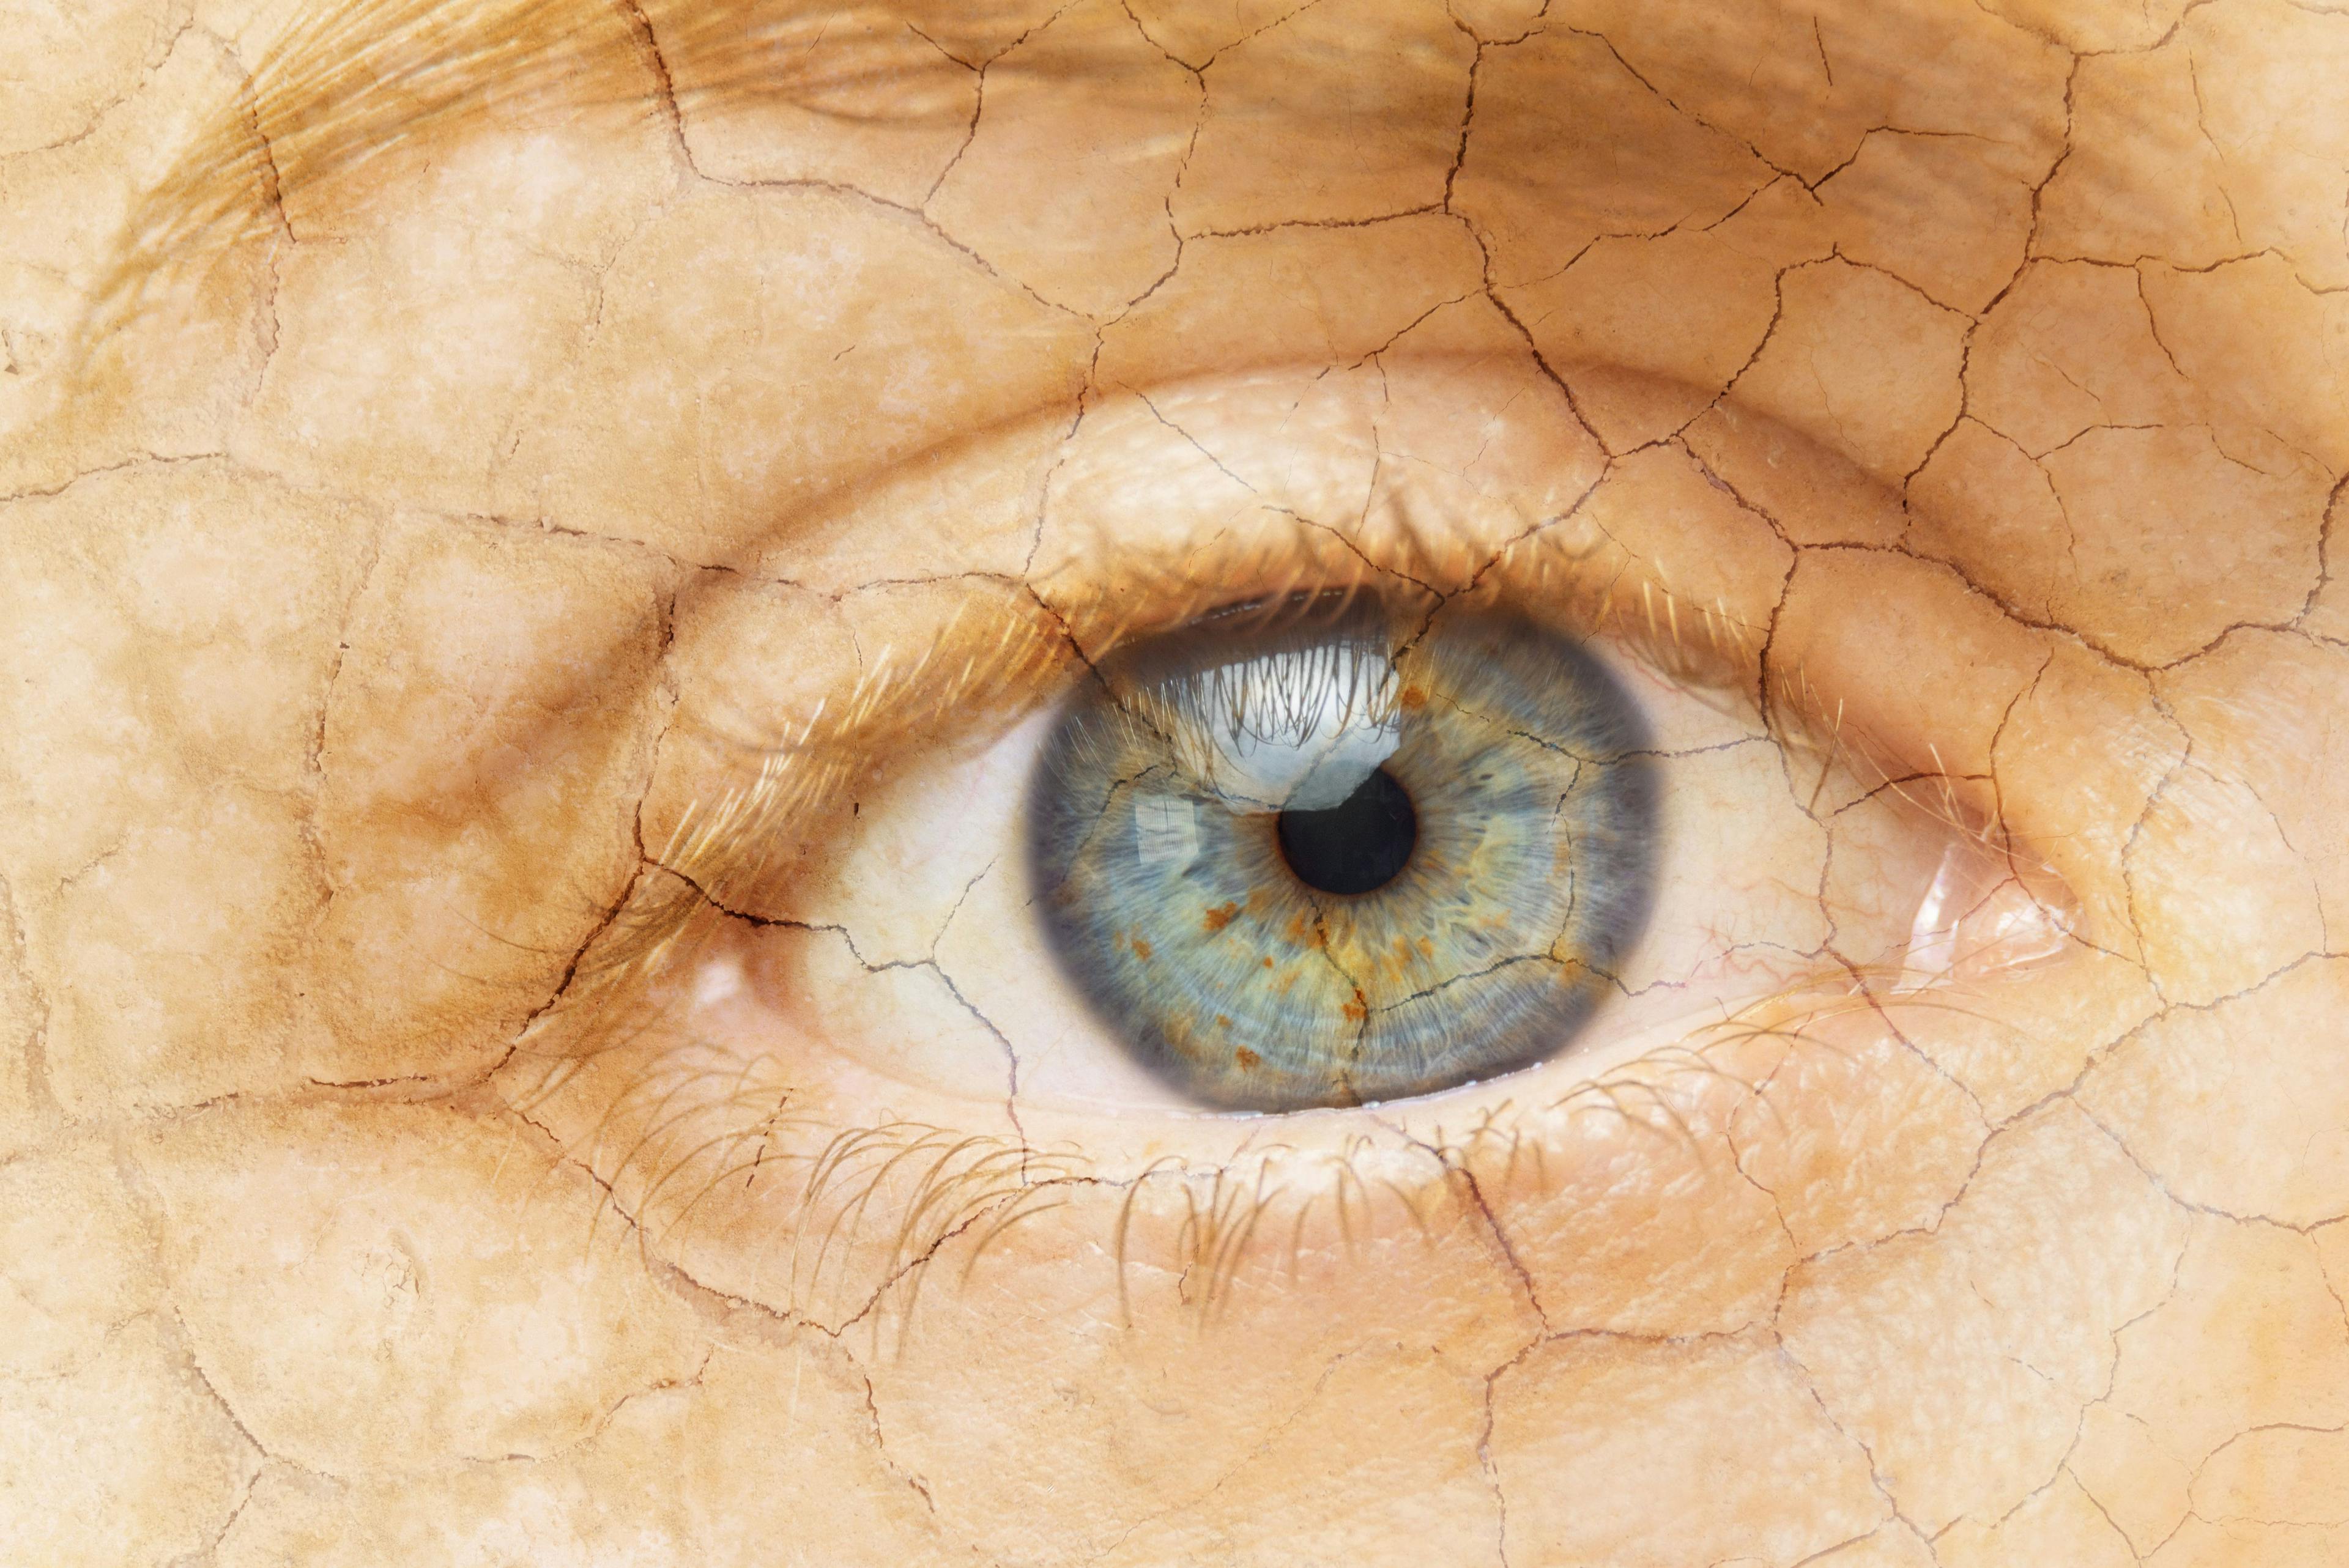 Image credit: herraez | stock.adobe.com. Cracked Skin. Closeup of a female eye with cracked skin. Aging process or pain and loneliness conceptual image.